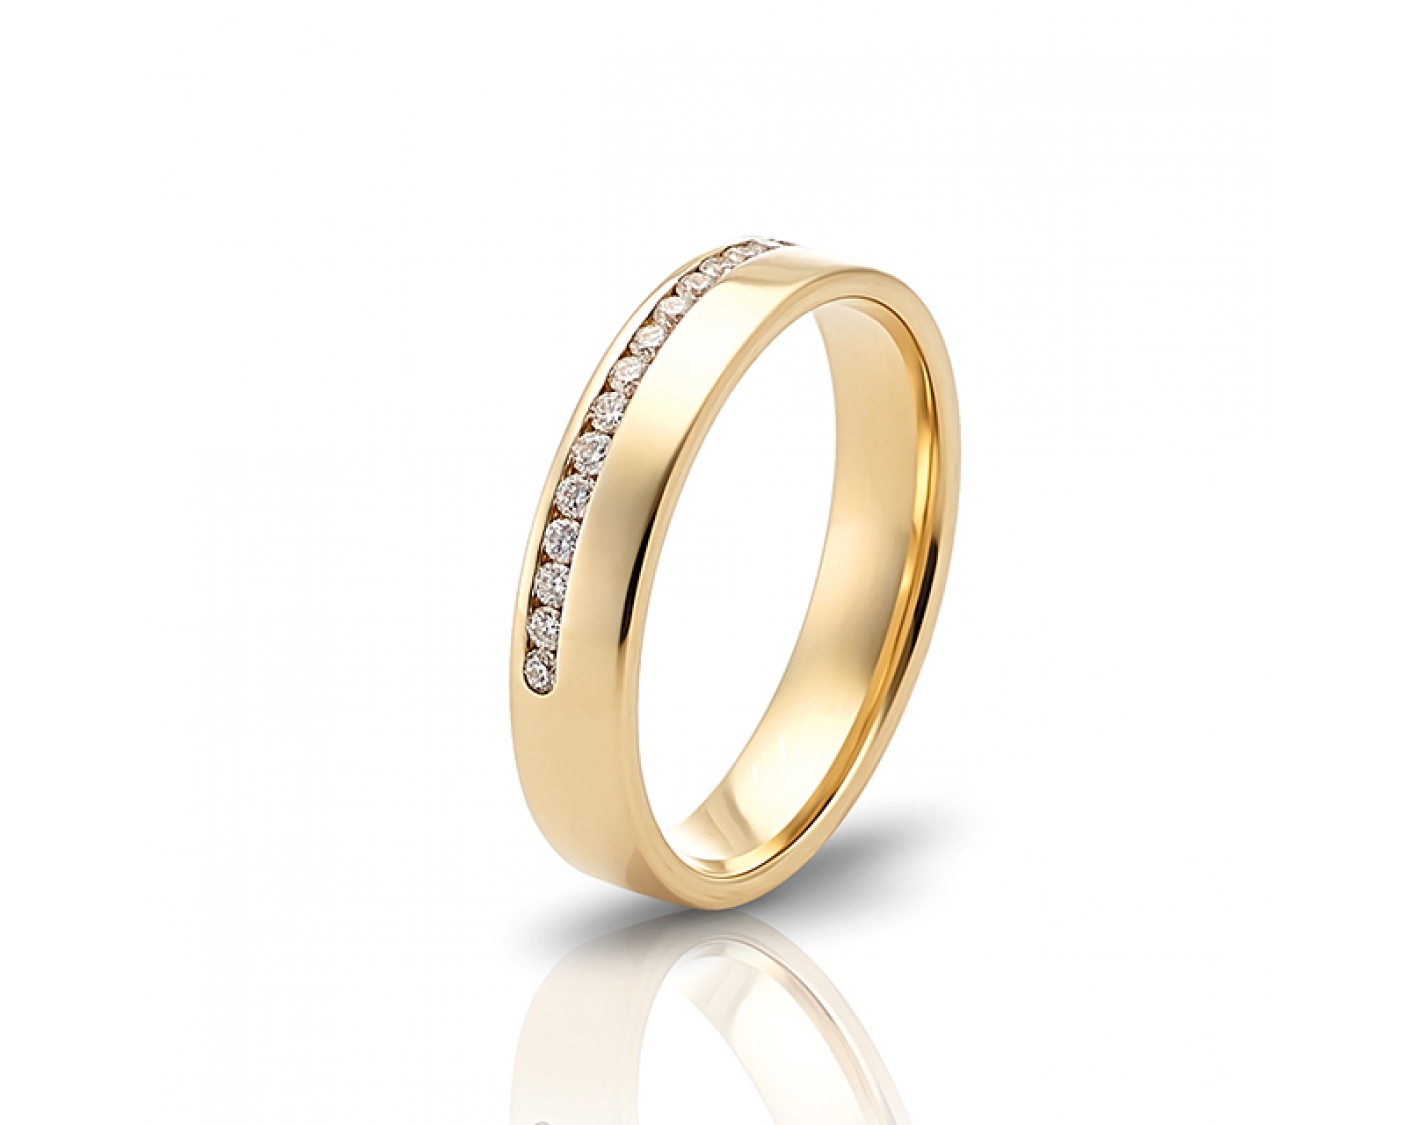 18k rose gold 4mm wedding band with diamonds Photos & images